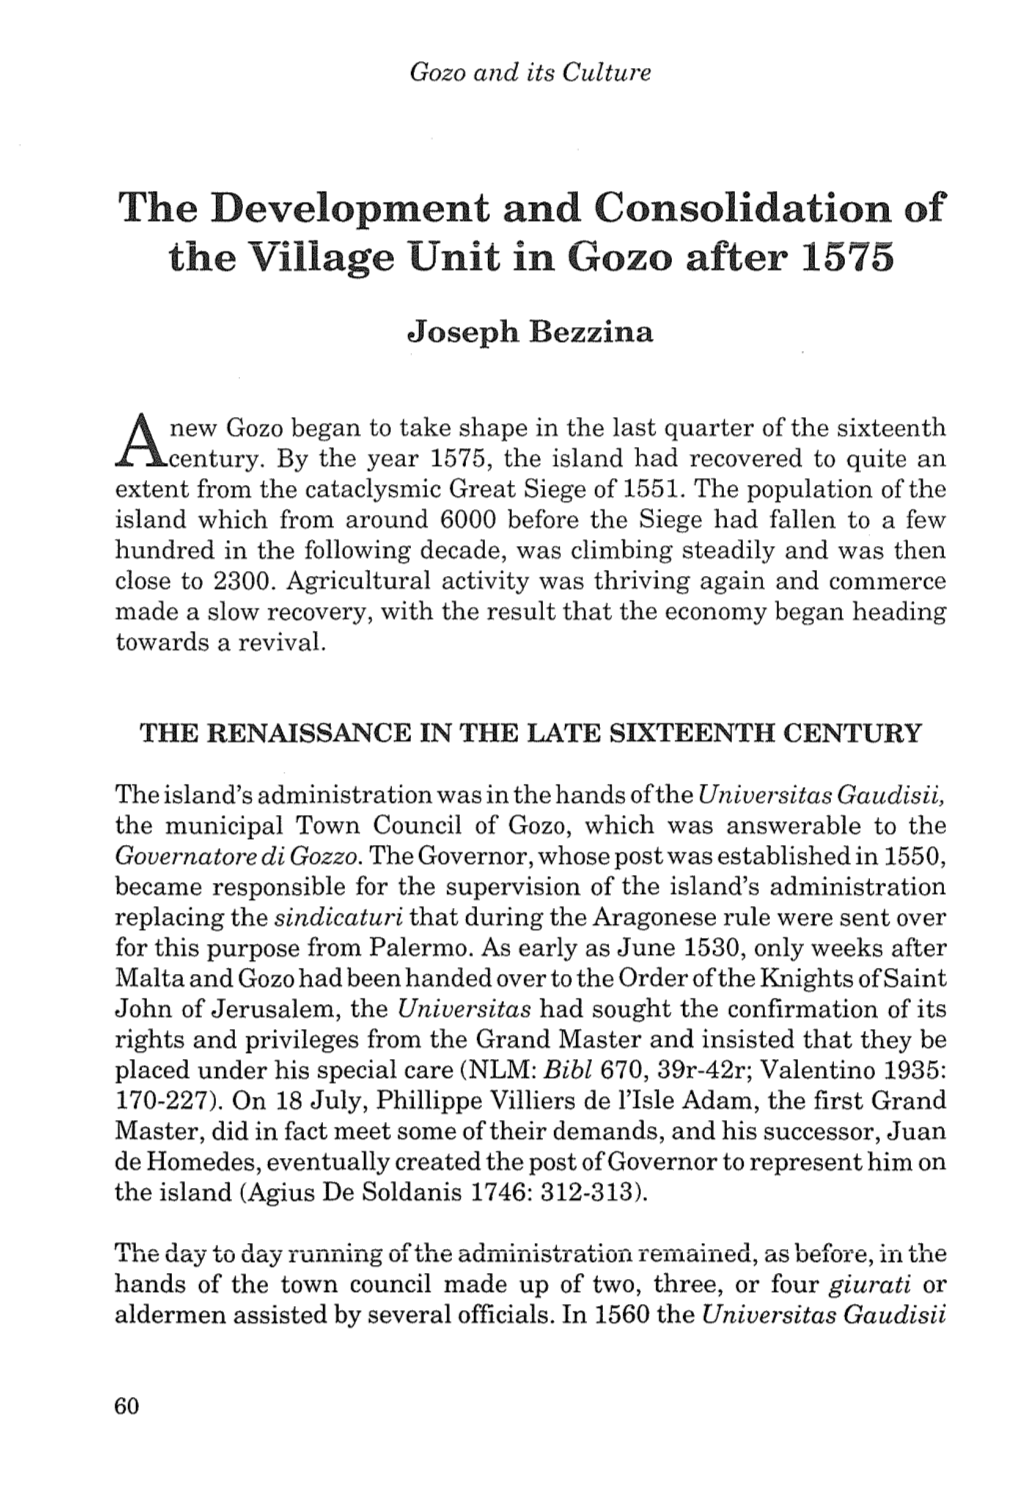 The Development and Consolidation of the Village Unit in Gozo After 1575